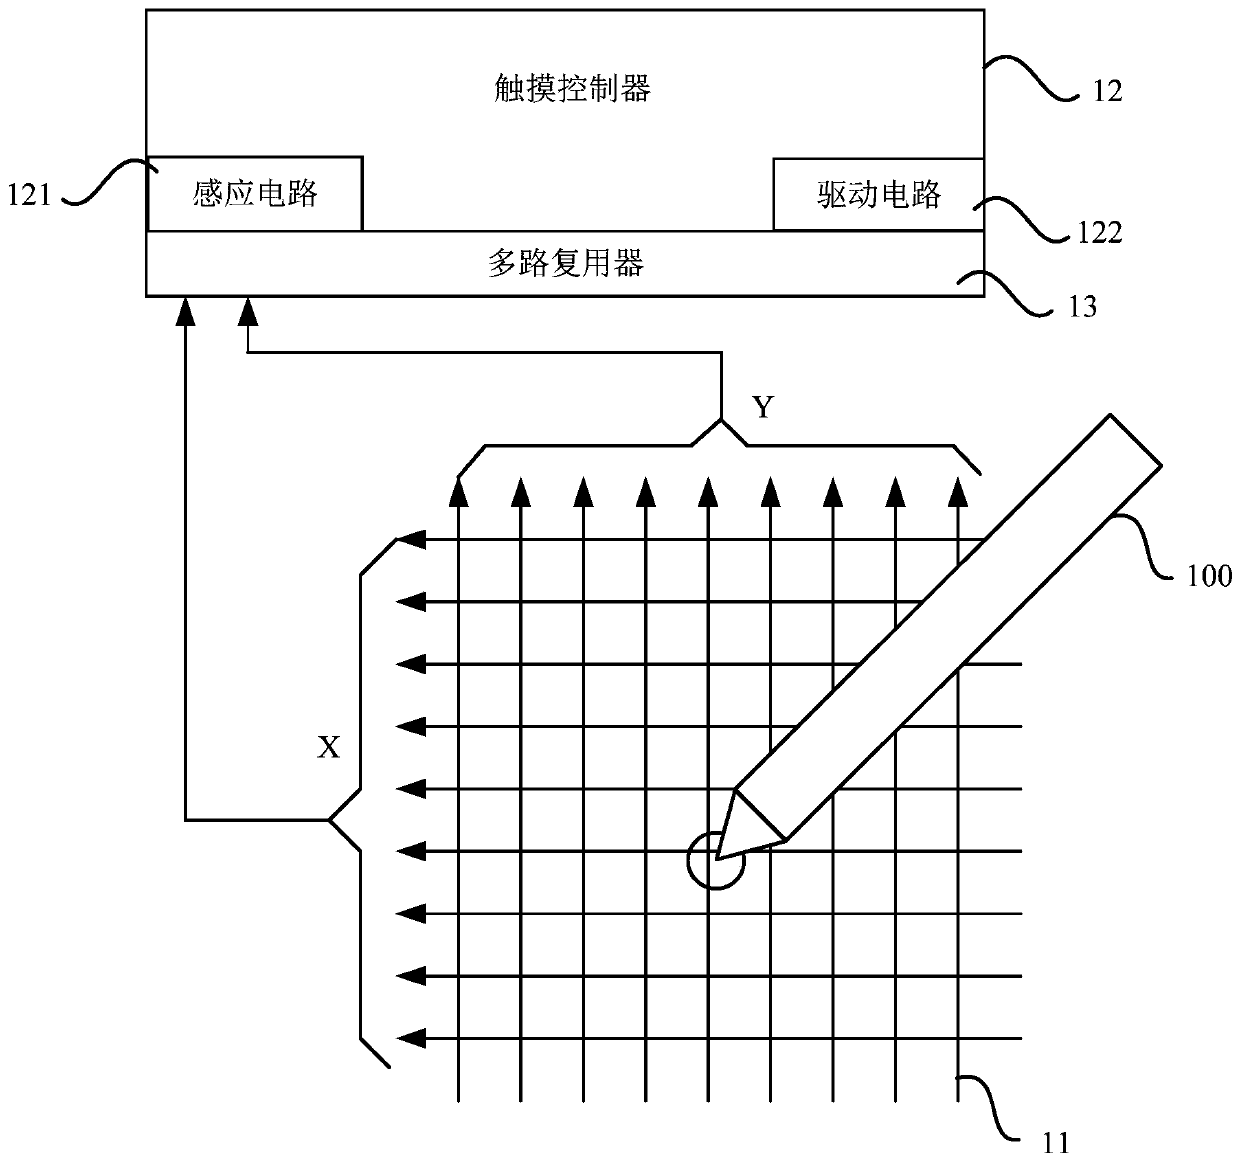 Signal transmitting and receiving method, processor chip, active pen, touch screen